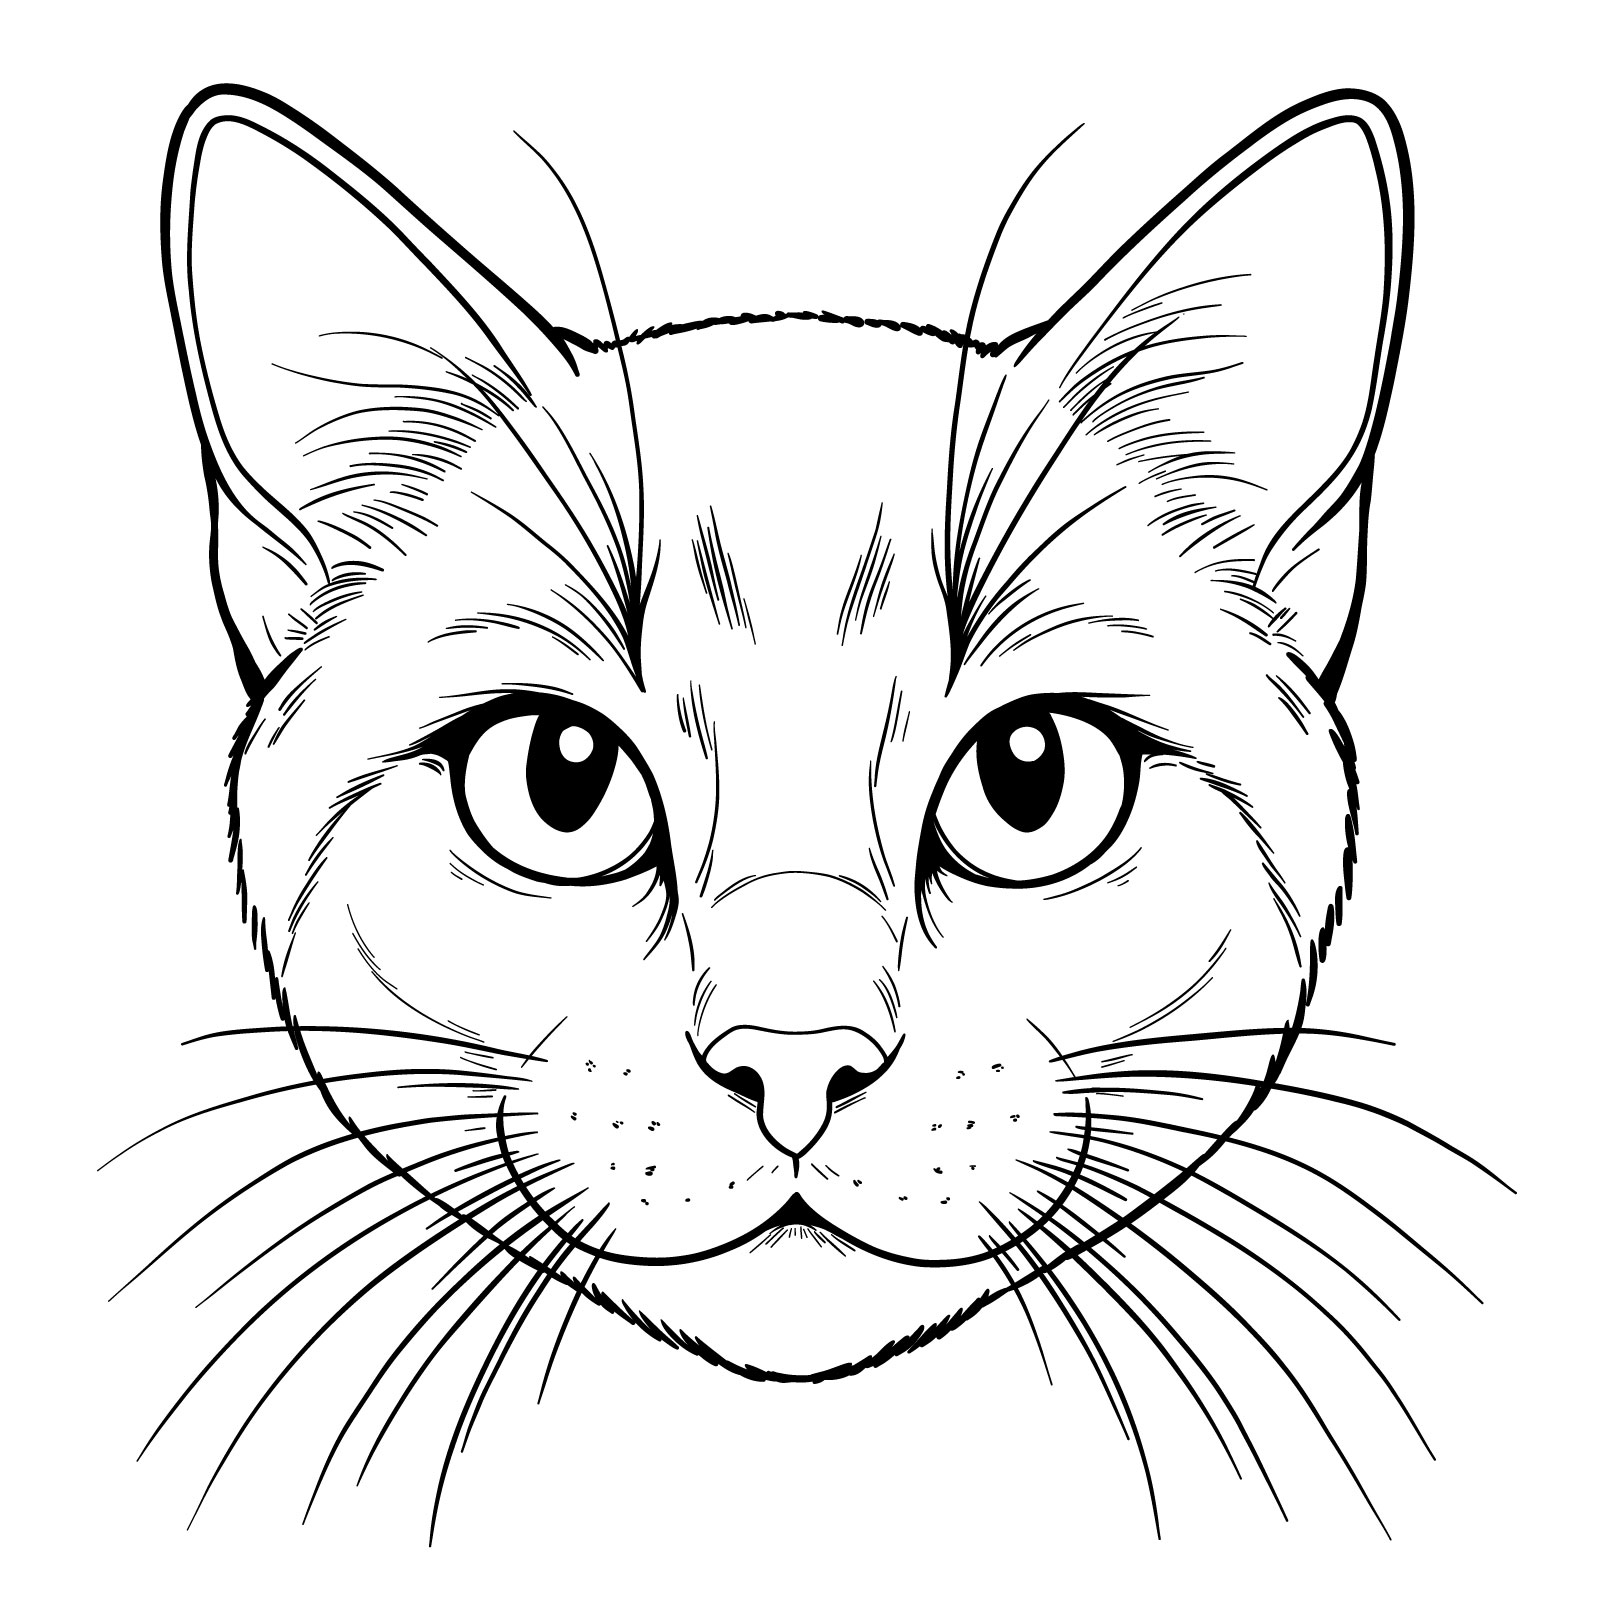 How to draw a cat's face - easy step-by-step drawing guide